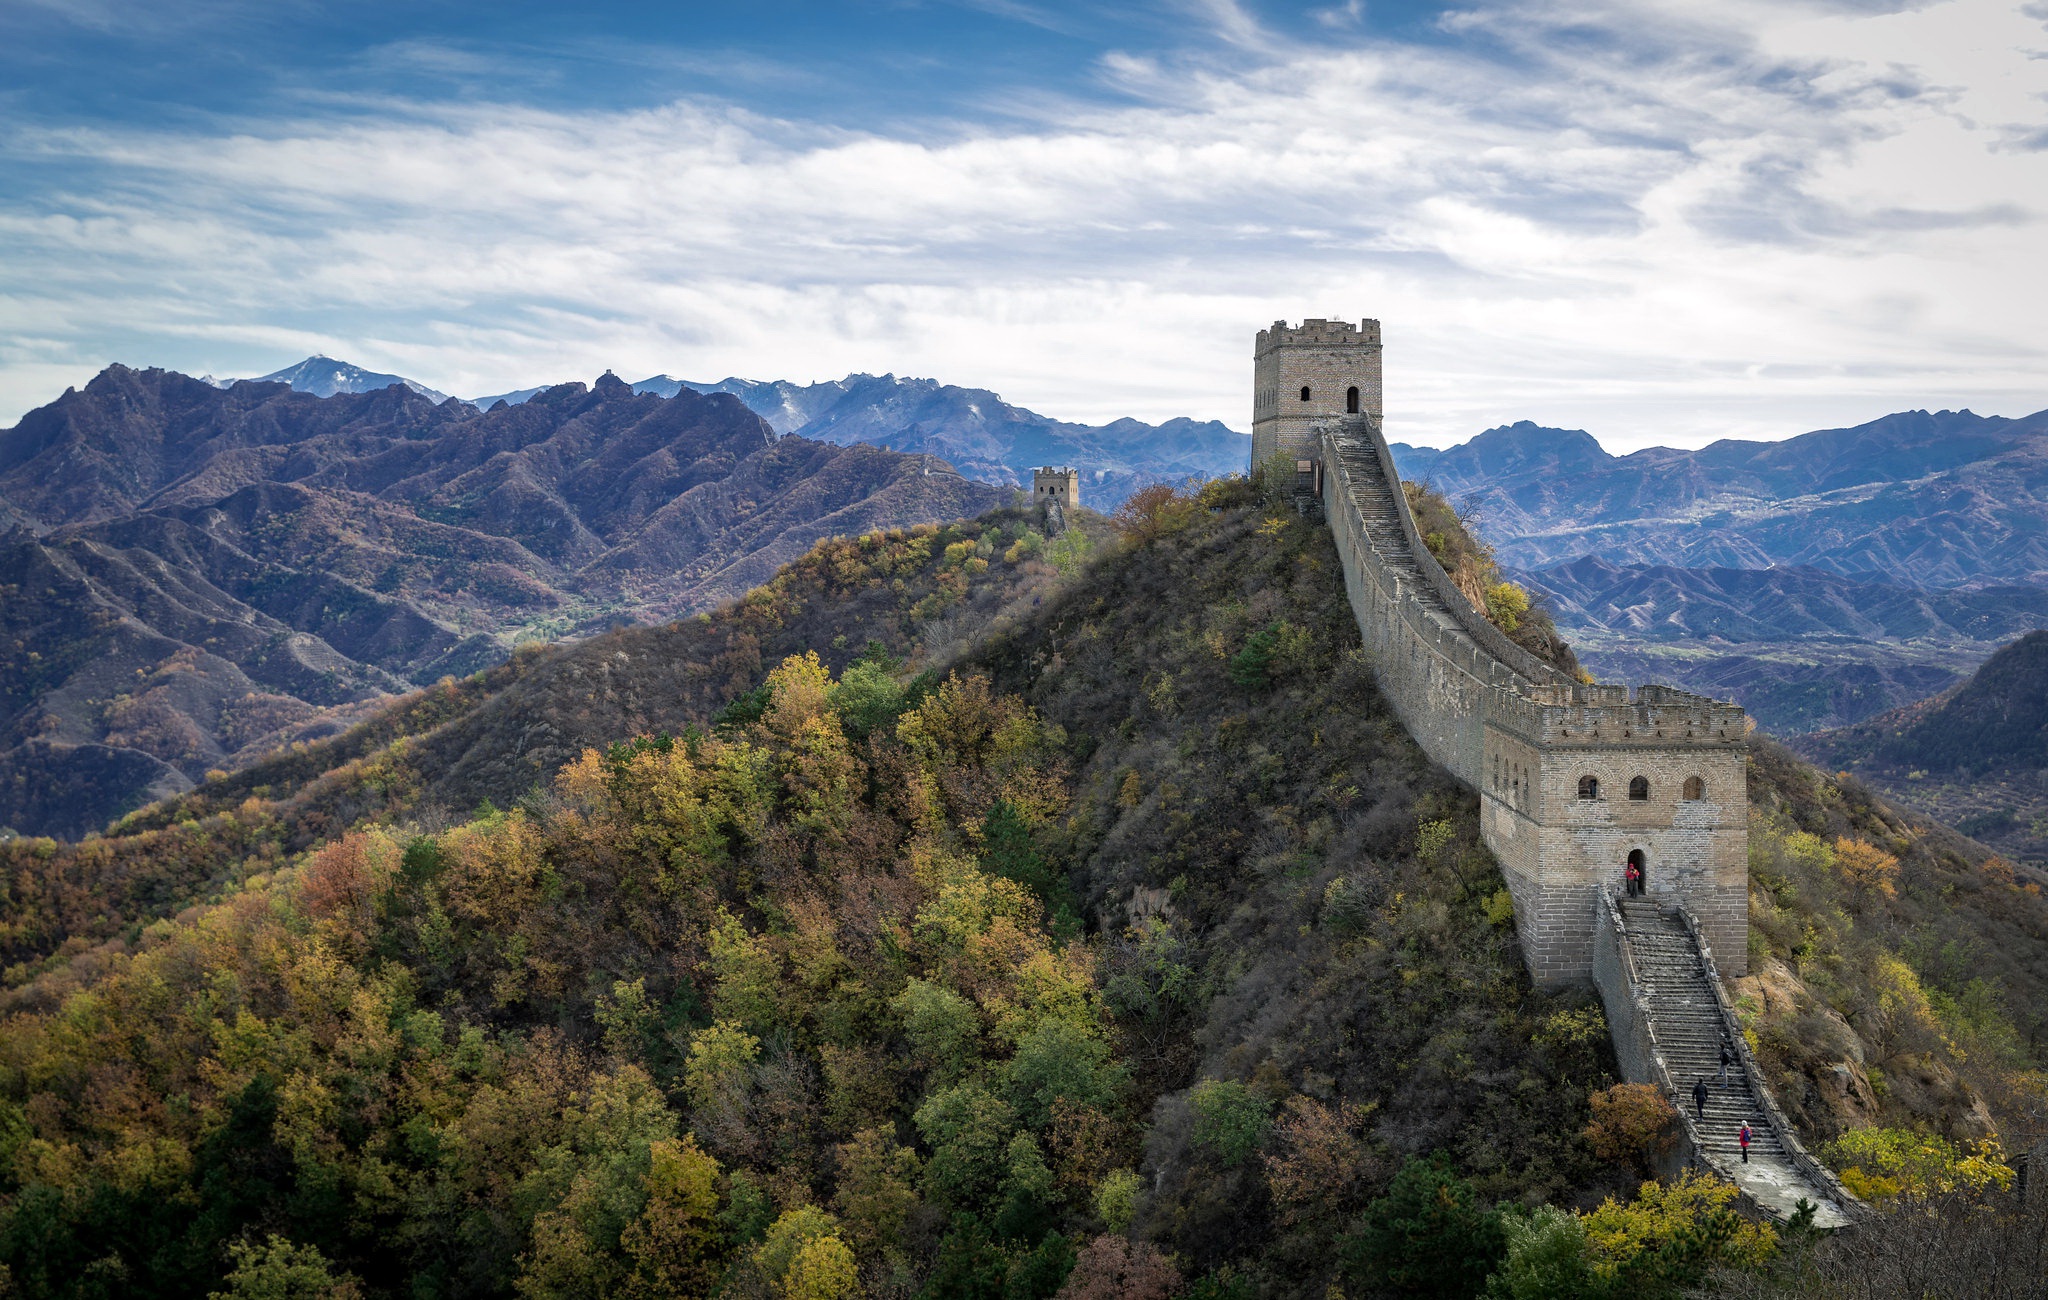 General 2048x1300 Great Wall of China China Asia landscape